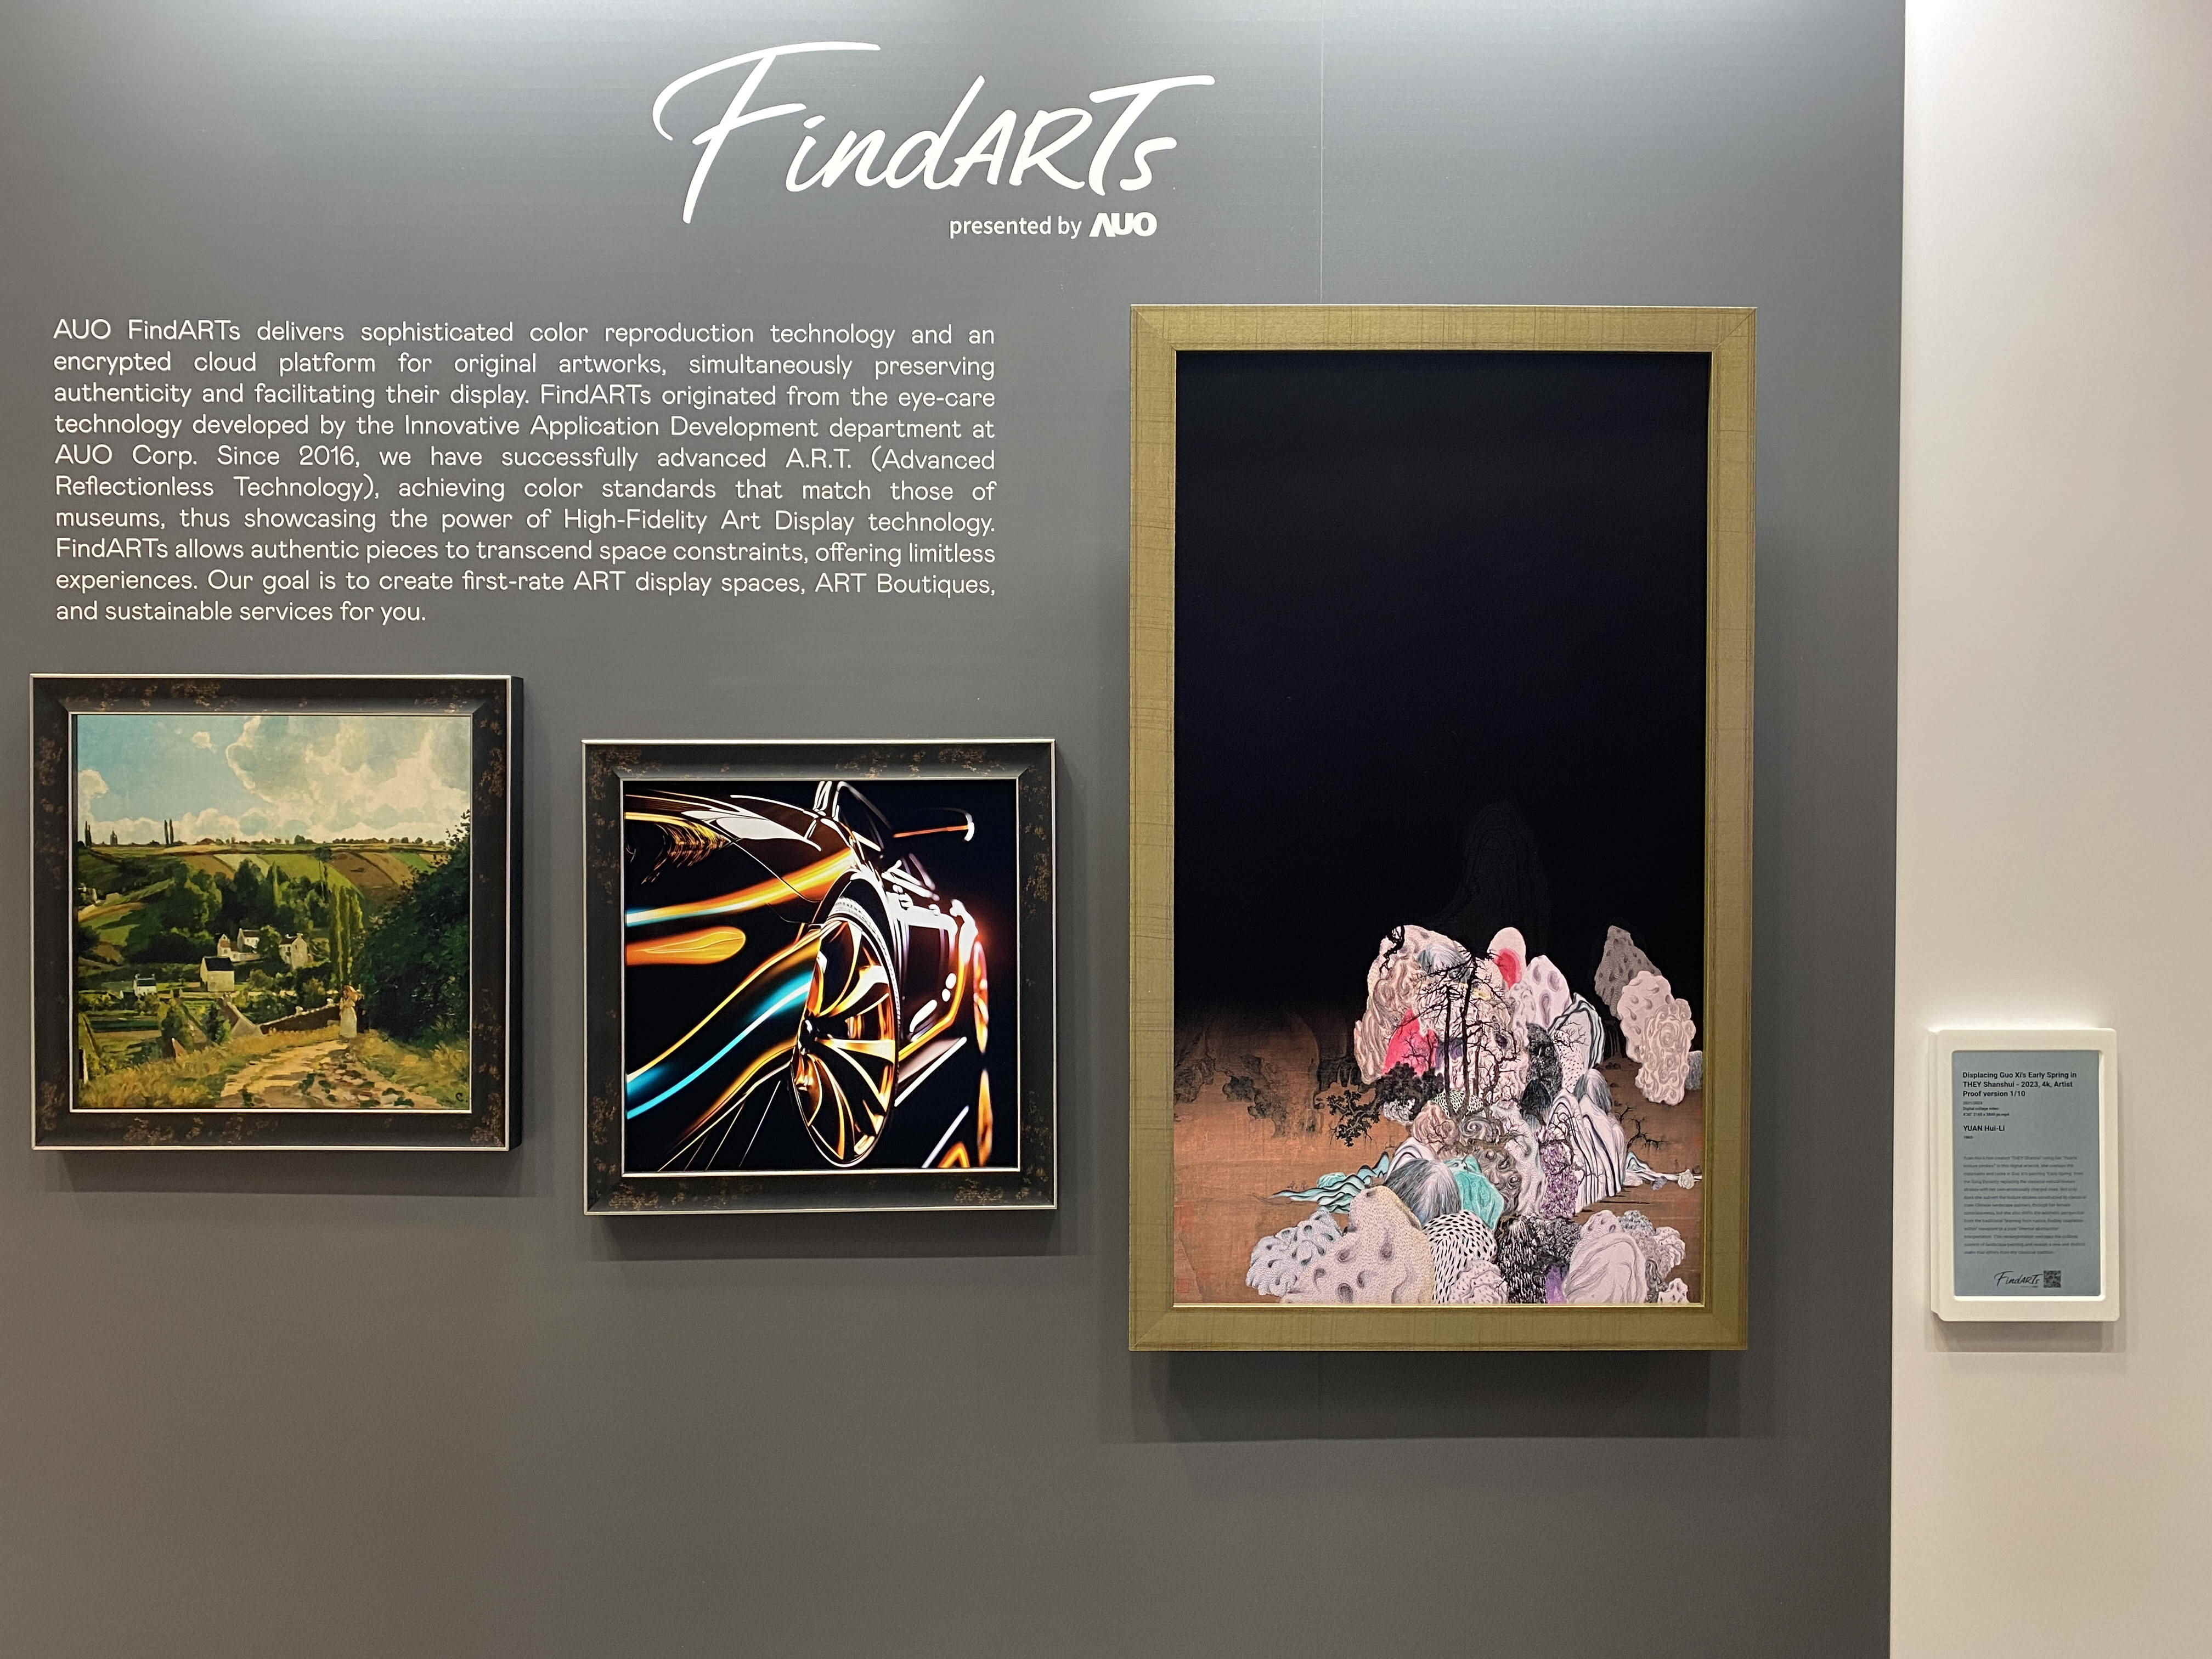 With AUO FindARTs, car sales showrooms can be transformed by presenting a selection of artworks that align with customer preferences, alongside car models.